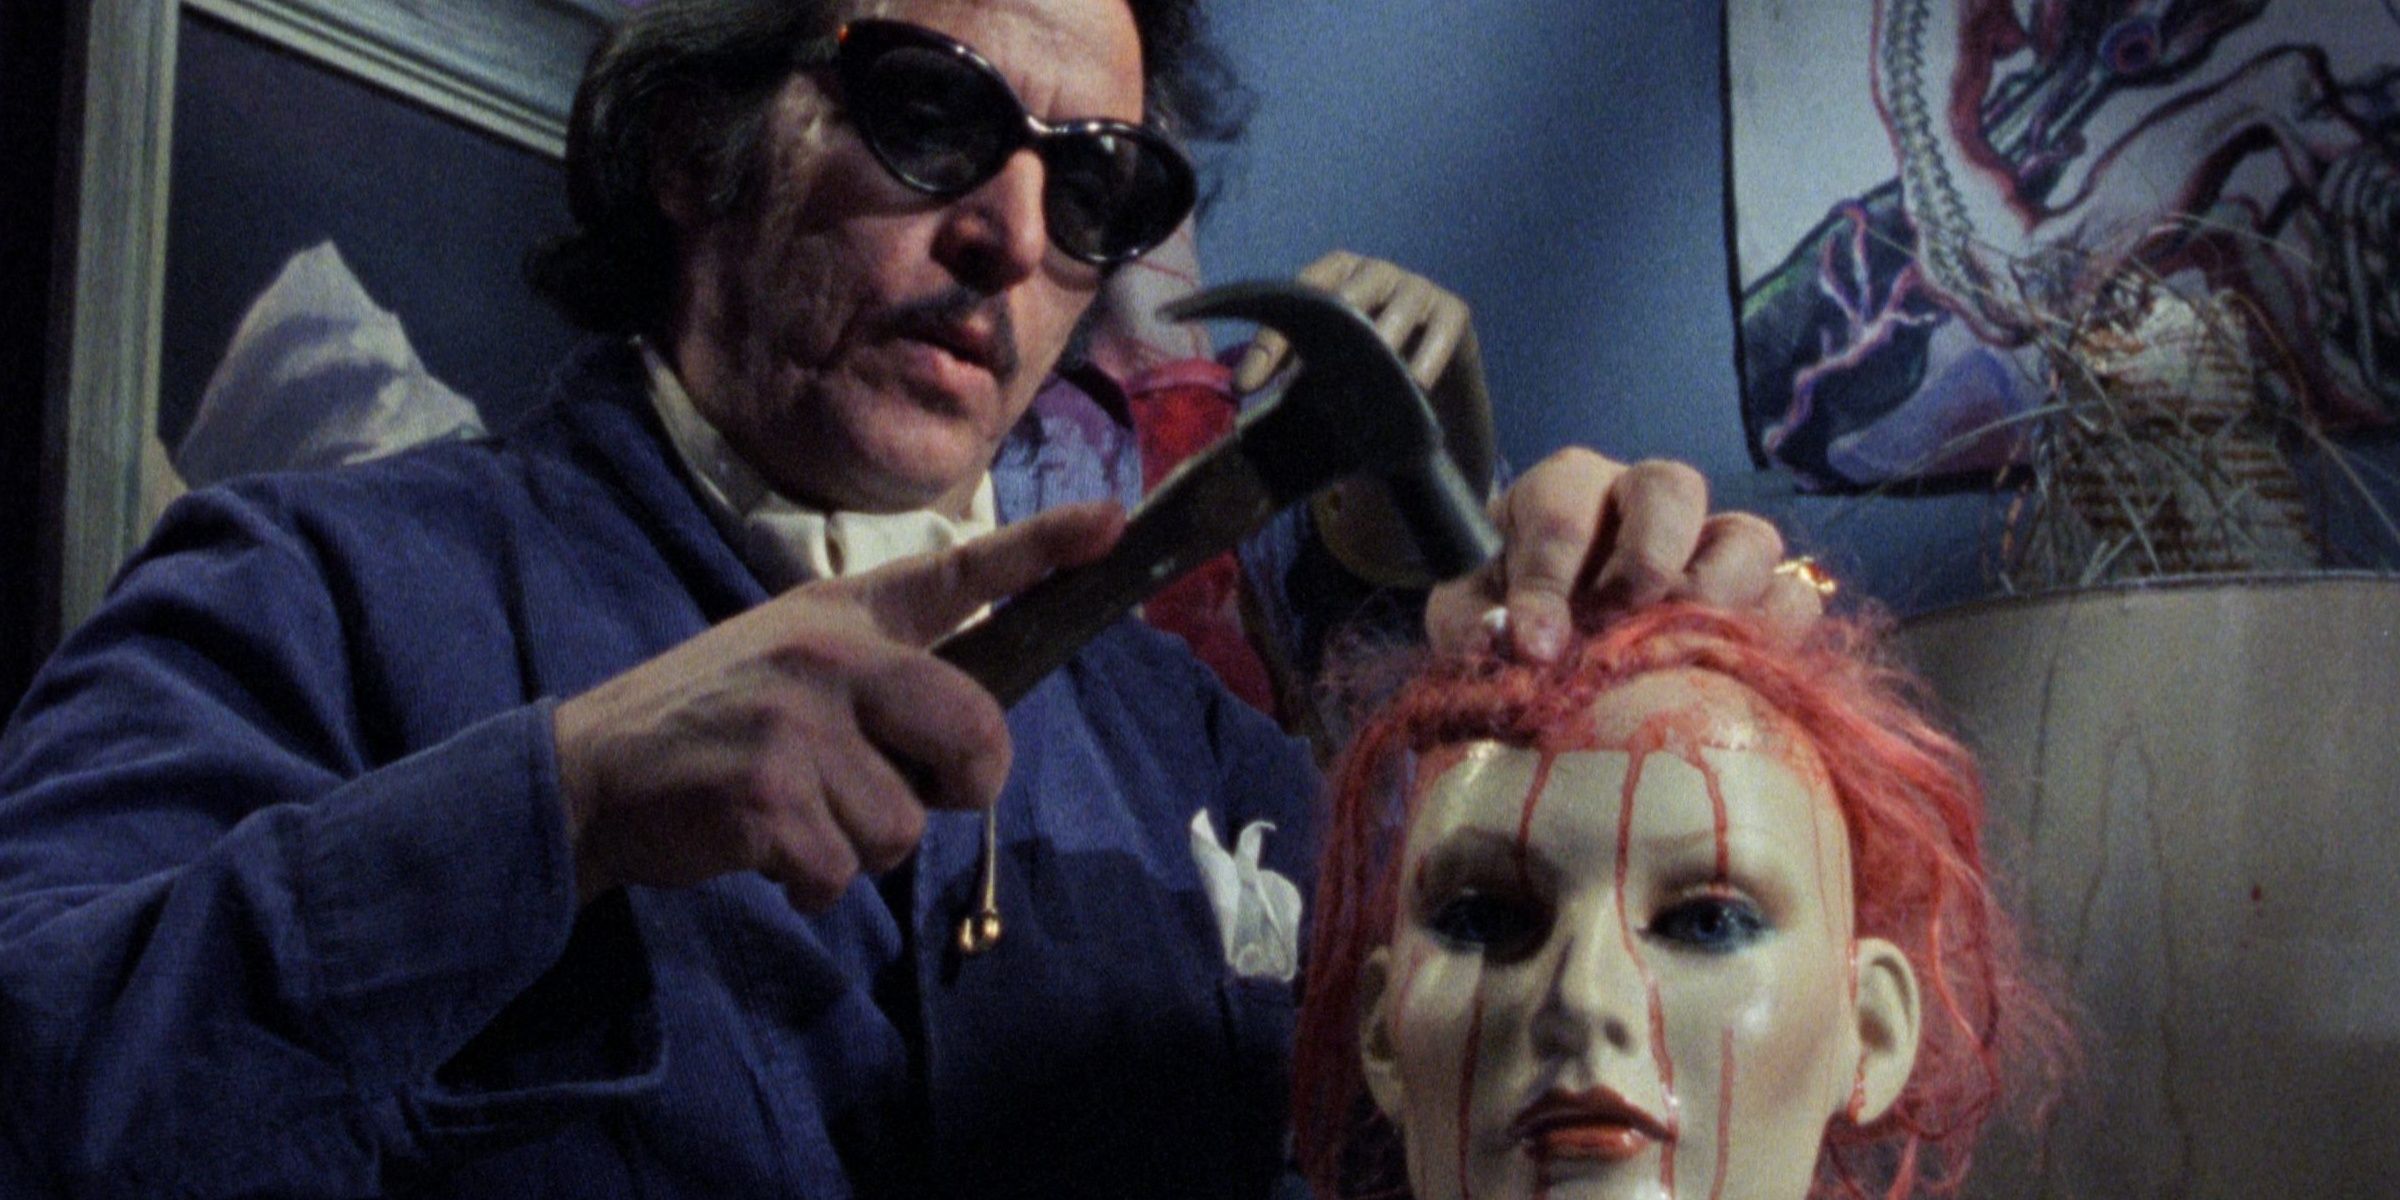 Frank hammering a nail into a mannequin's head in Maniac 